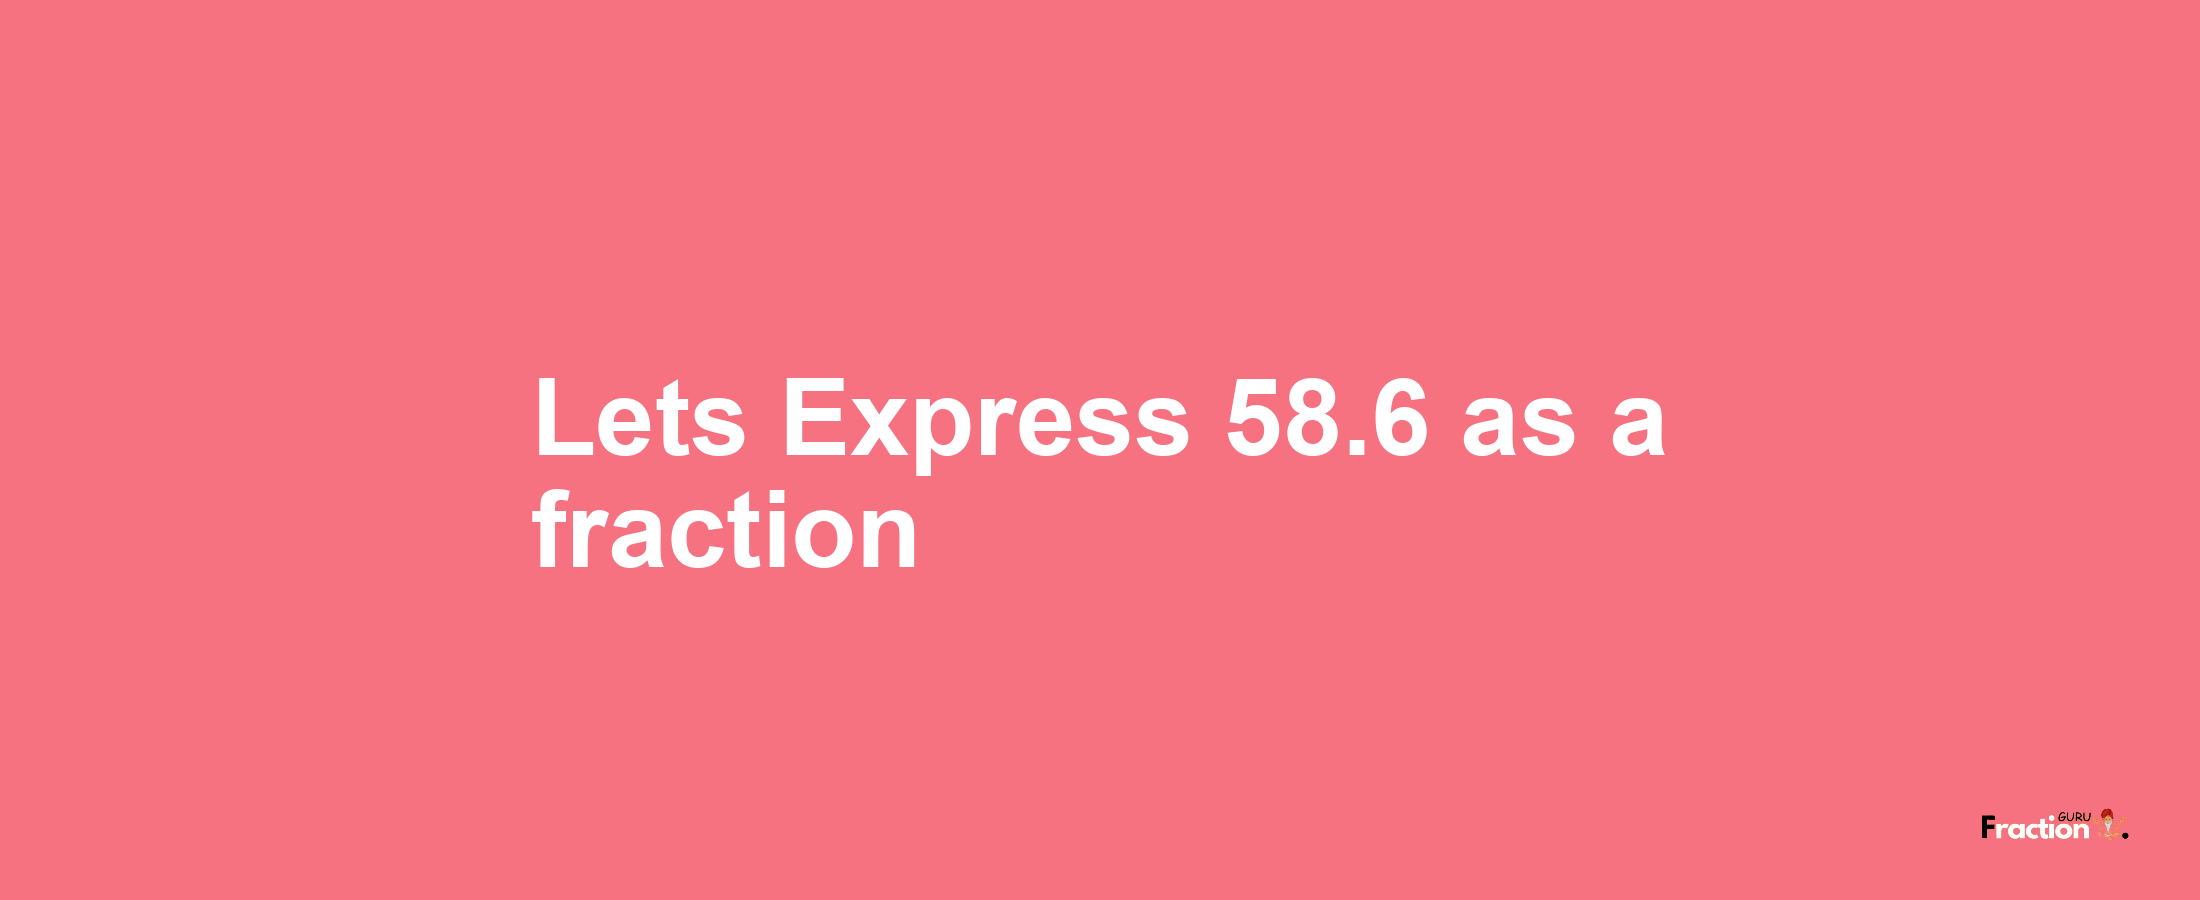 Lets Express 58.6 as afraction